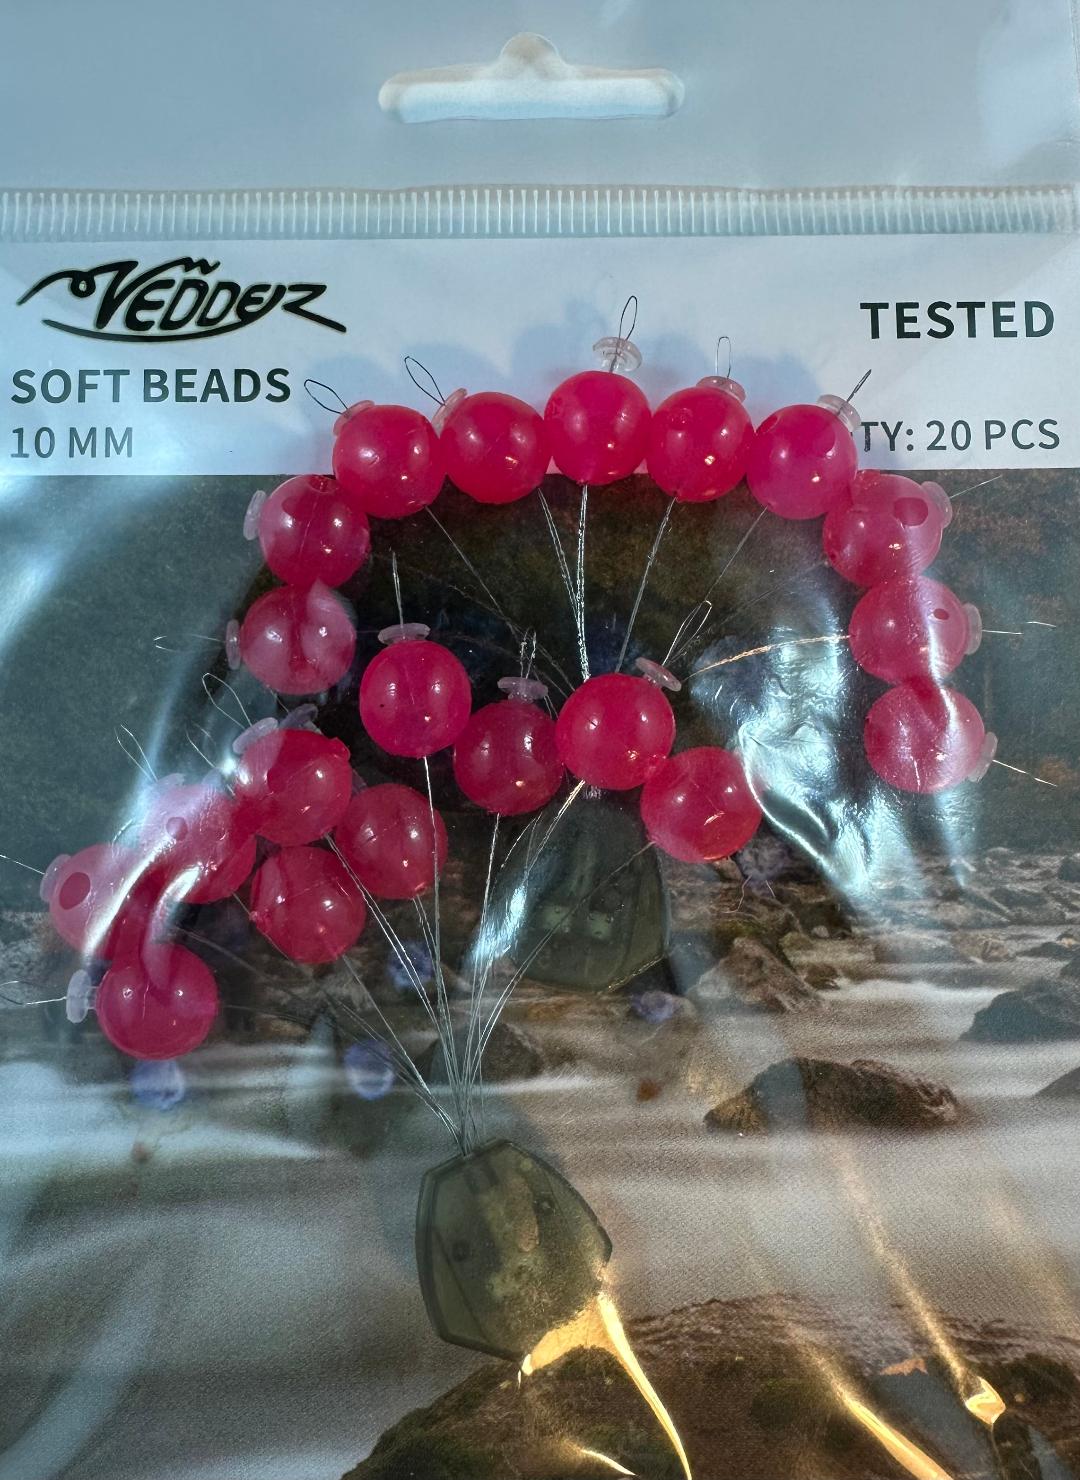 VSB-DP 10 Vedder 10 mm Dark Pink Soft Beads x 20 with Stoppers x 20